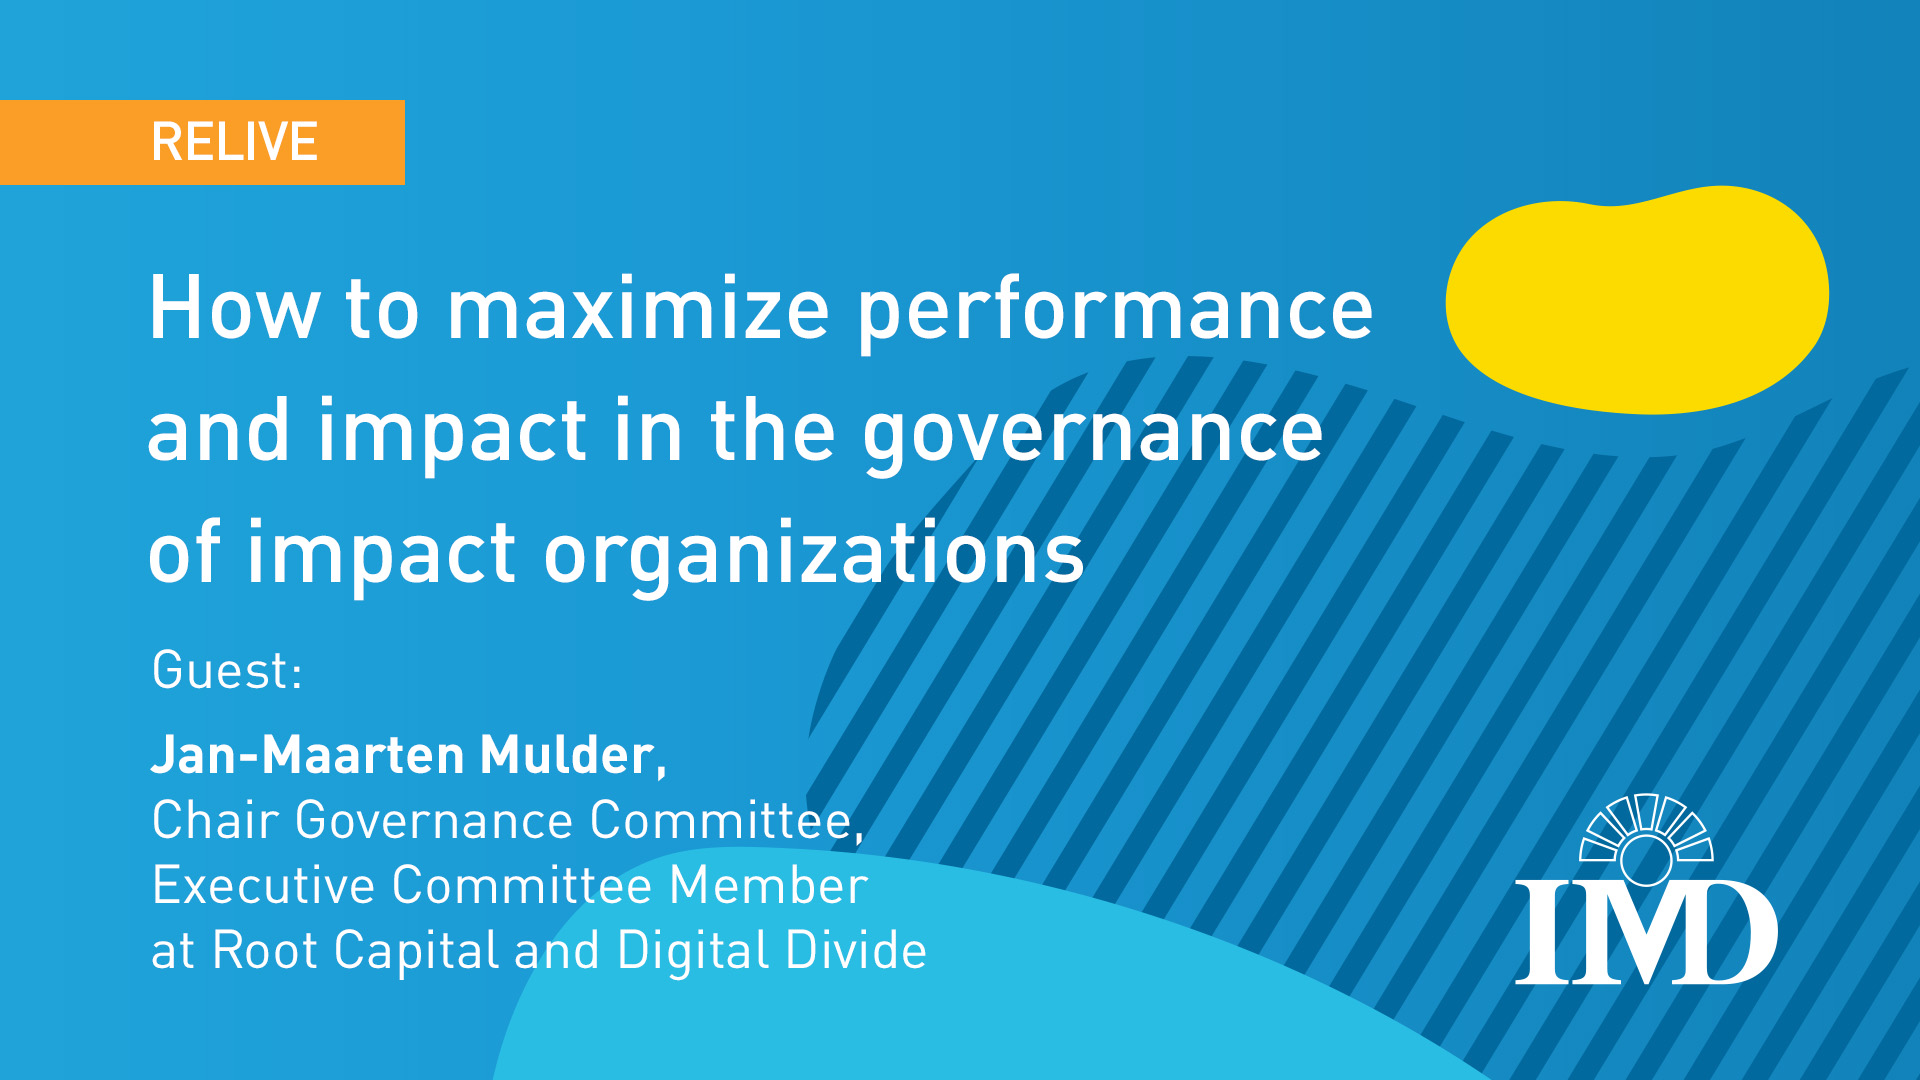 How to maximize performance and impact in the governance of impact organizations